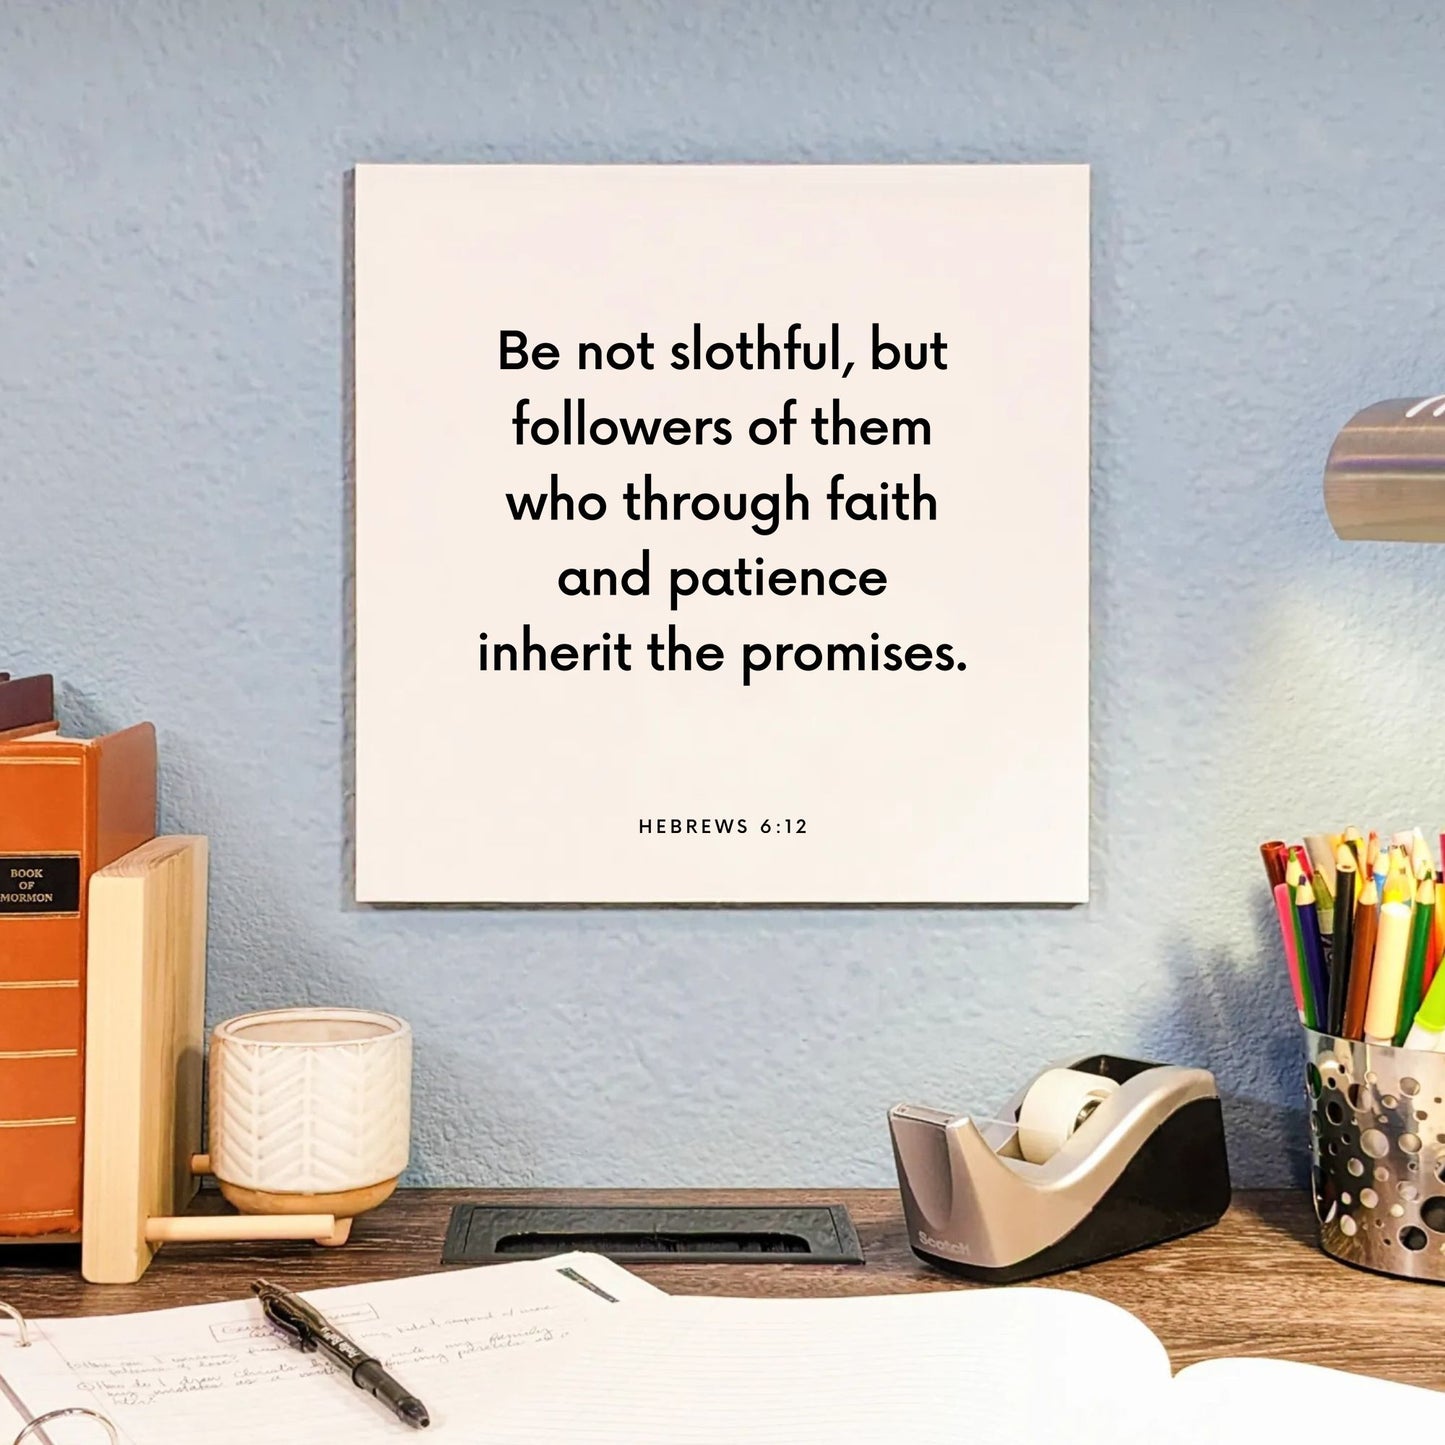 Desk mouting of the scripture tile for Hebrews 6:12 - "Be not slothful, but followers of them who through faith"